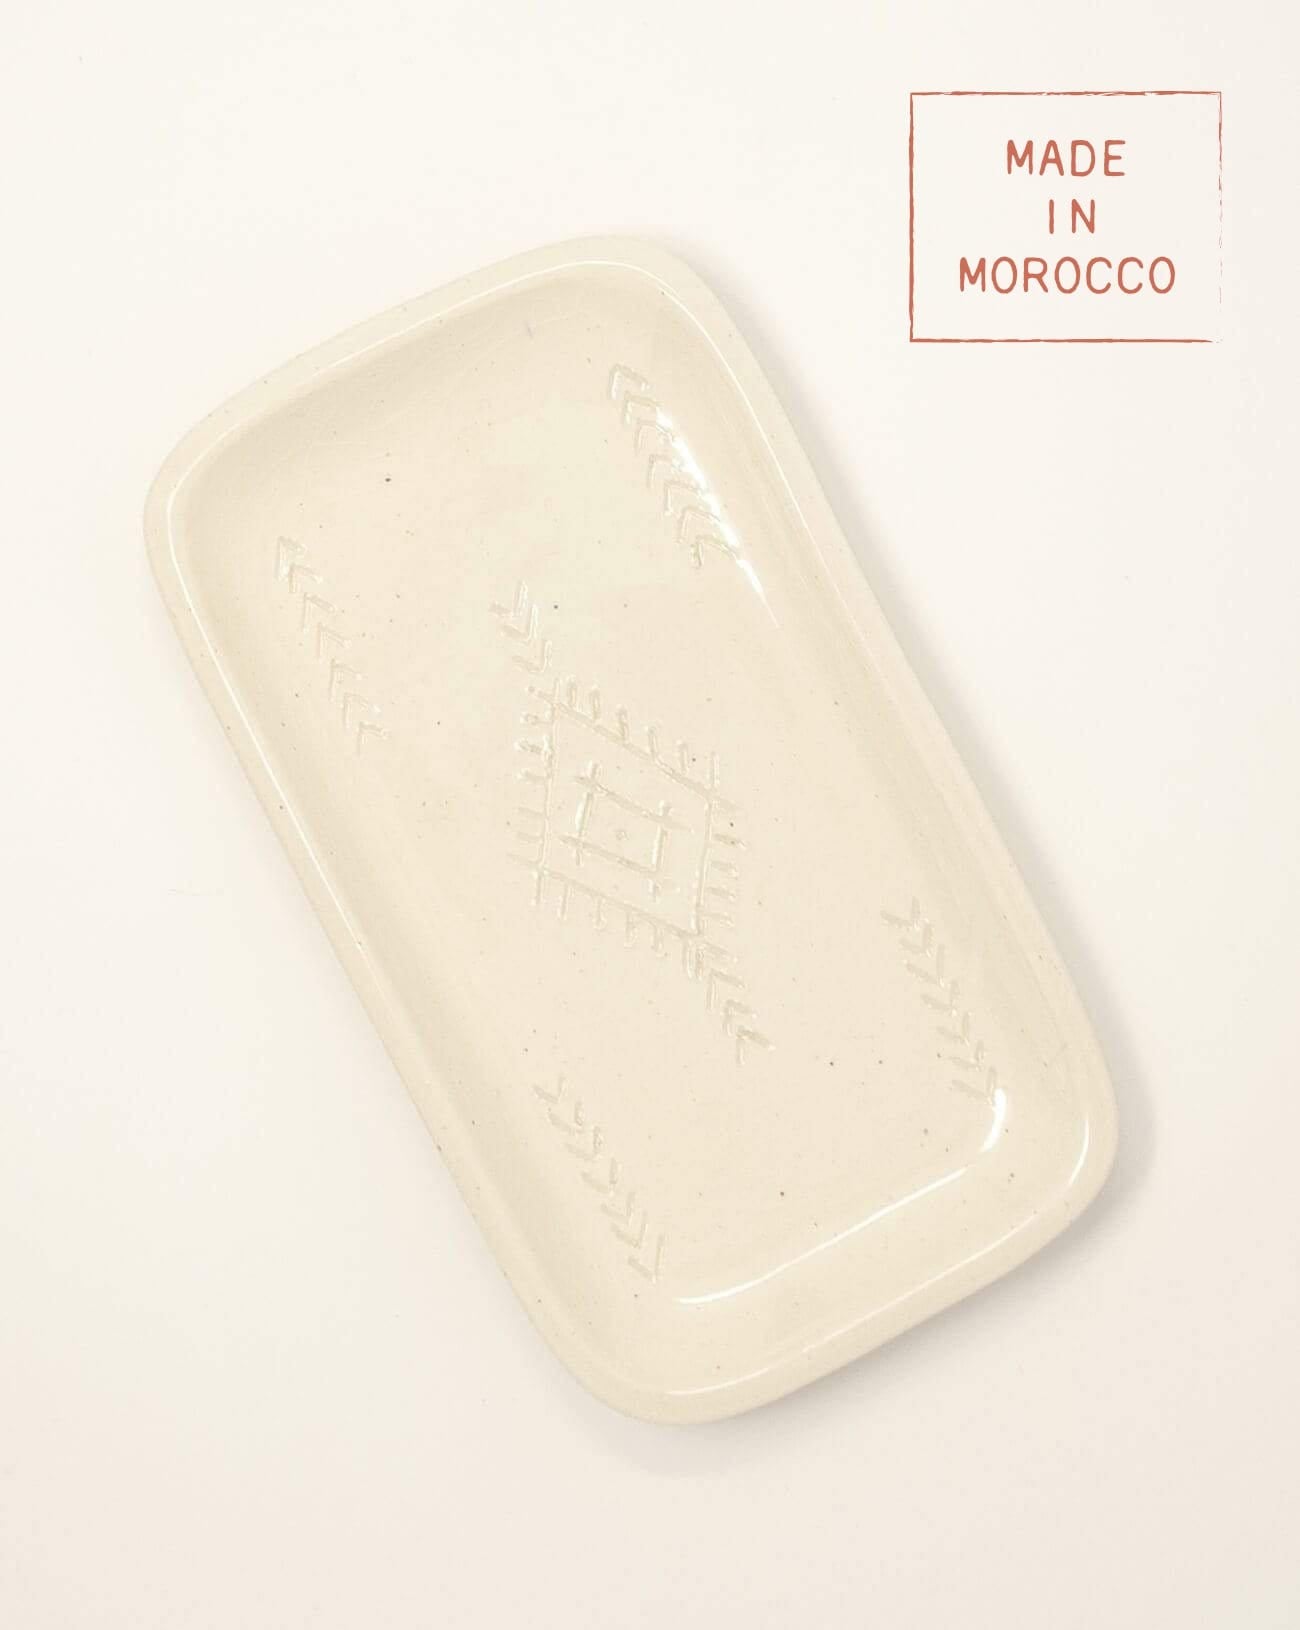 white rectangle ceramic soap tray made in morocco with designs in the center on a white background